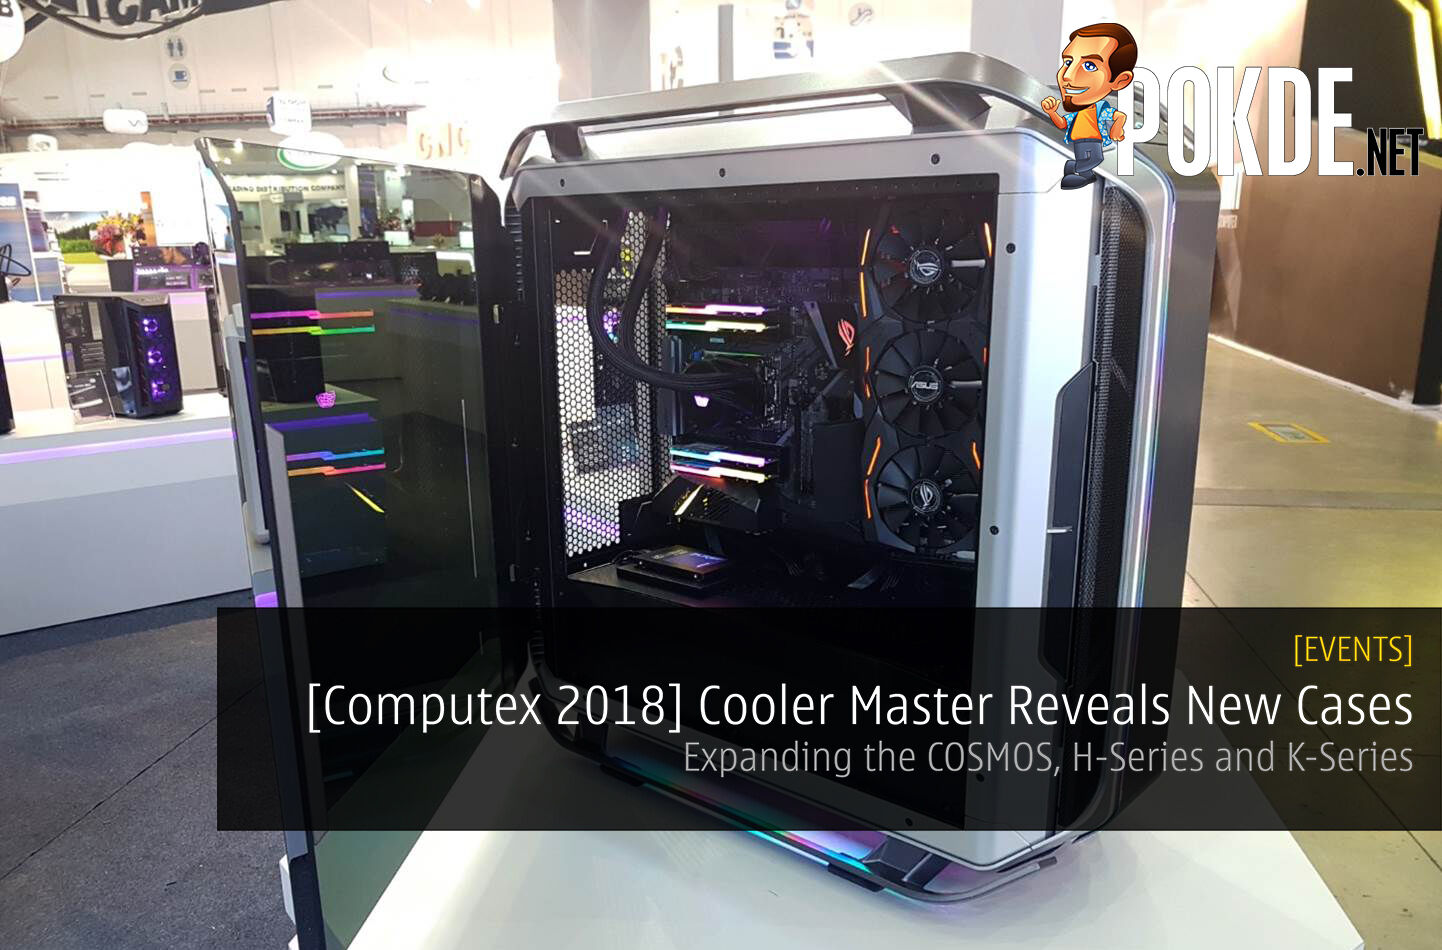 [Computex 2018] Cooler Master Reveals New Case Lineup - Expanding the COSMOS, H-Series and K-Series 24